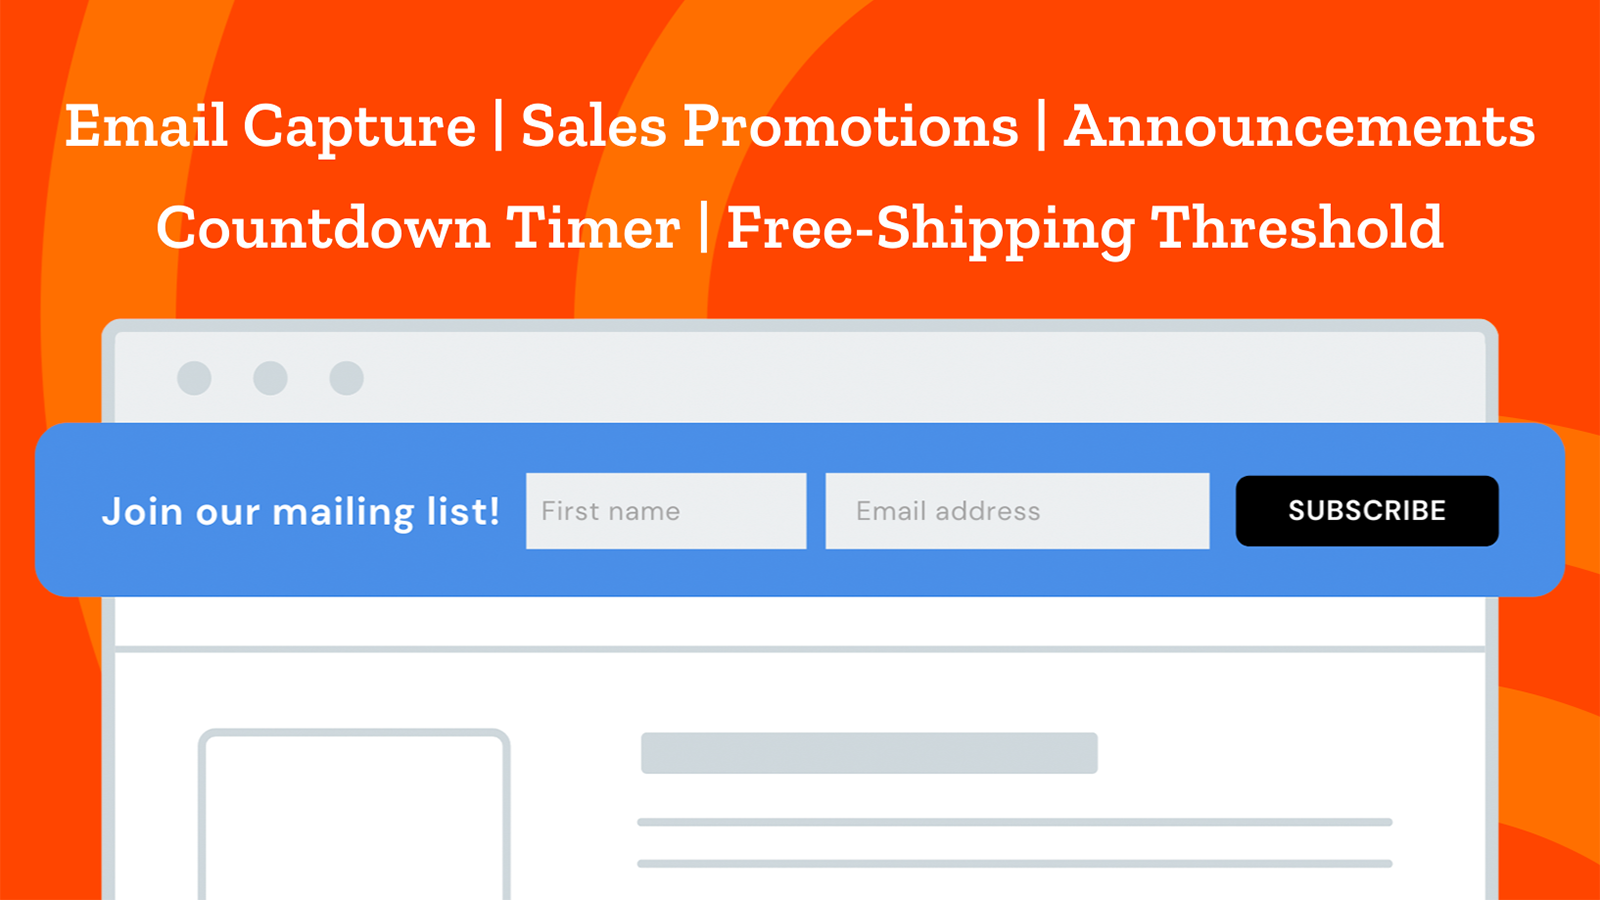 Email capture, sales promotions, announcements, countdown timer